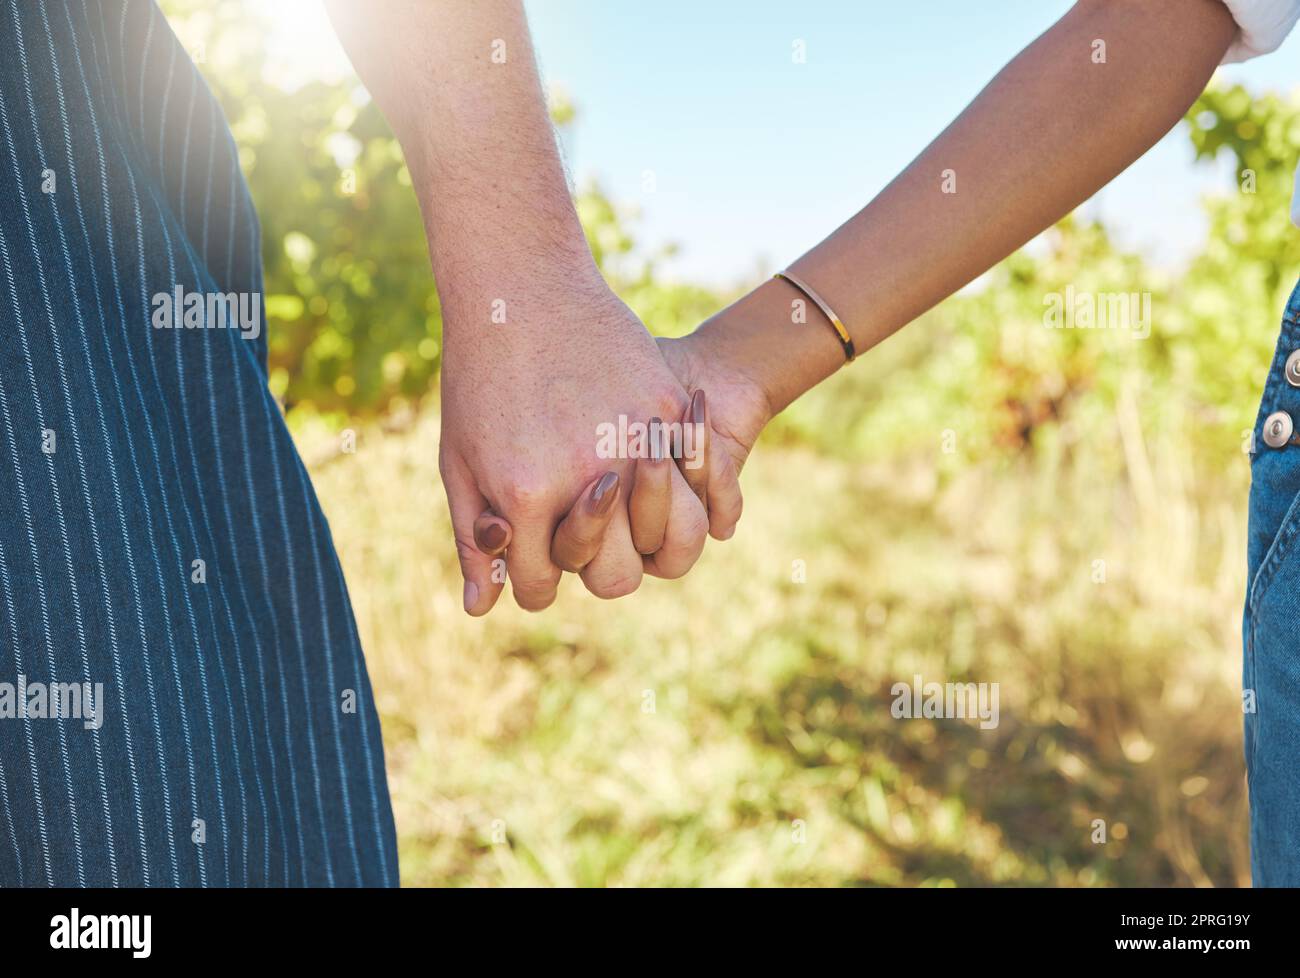 Love, support and couple of people holding hands in solidarity. Respect, trust and unity in relationship with partner. Woman and man happy with romantic and caring partnership together. Stock Photo